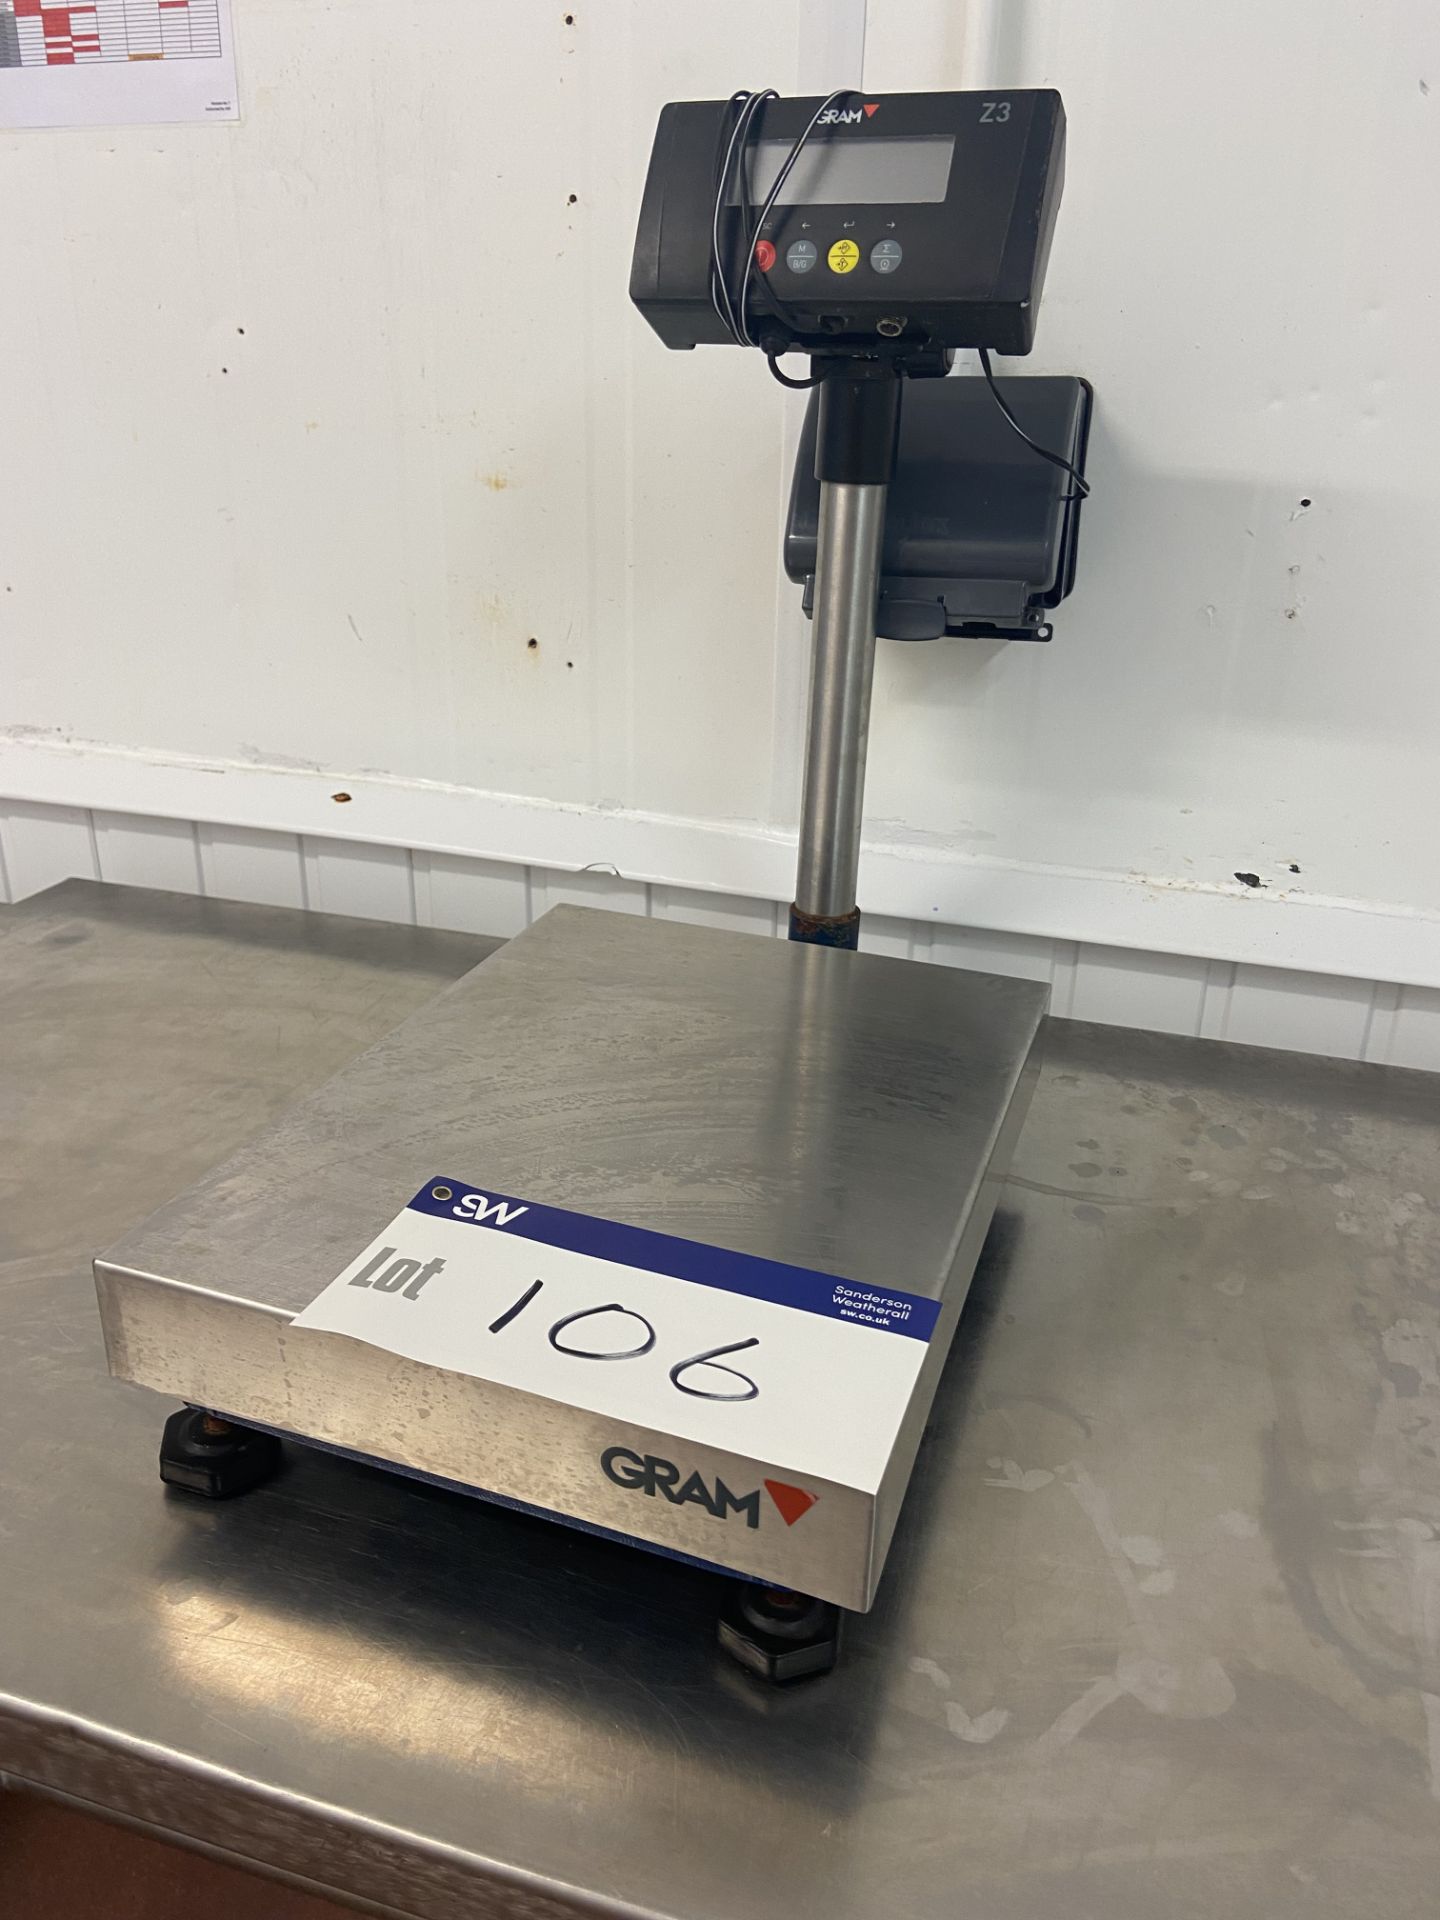 Gram ZM1SS1L-F1-30 30kg x 5g Loadcell Bench Scales, serial no. 0000370363 Please read the